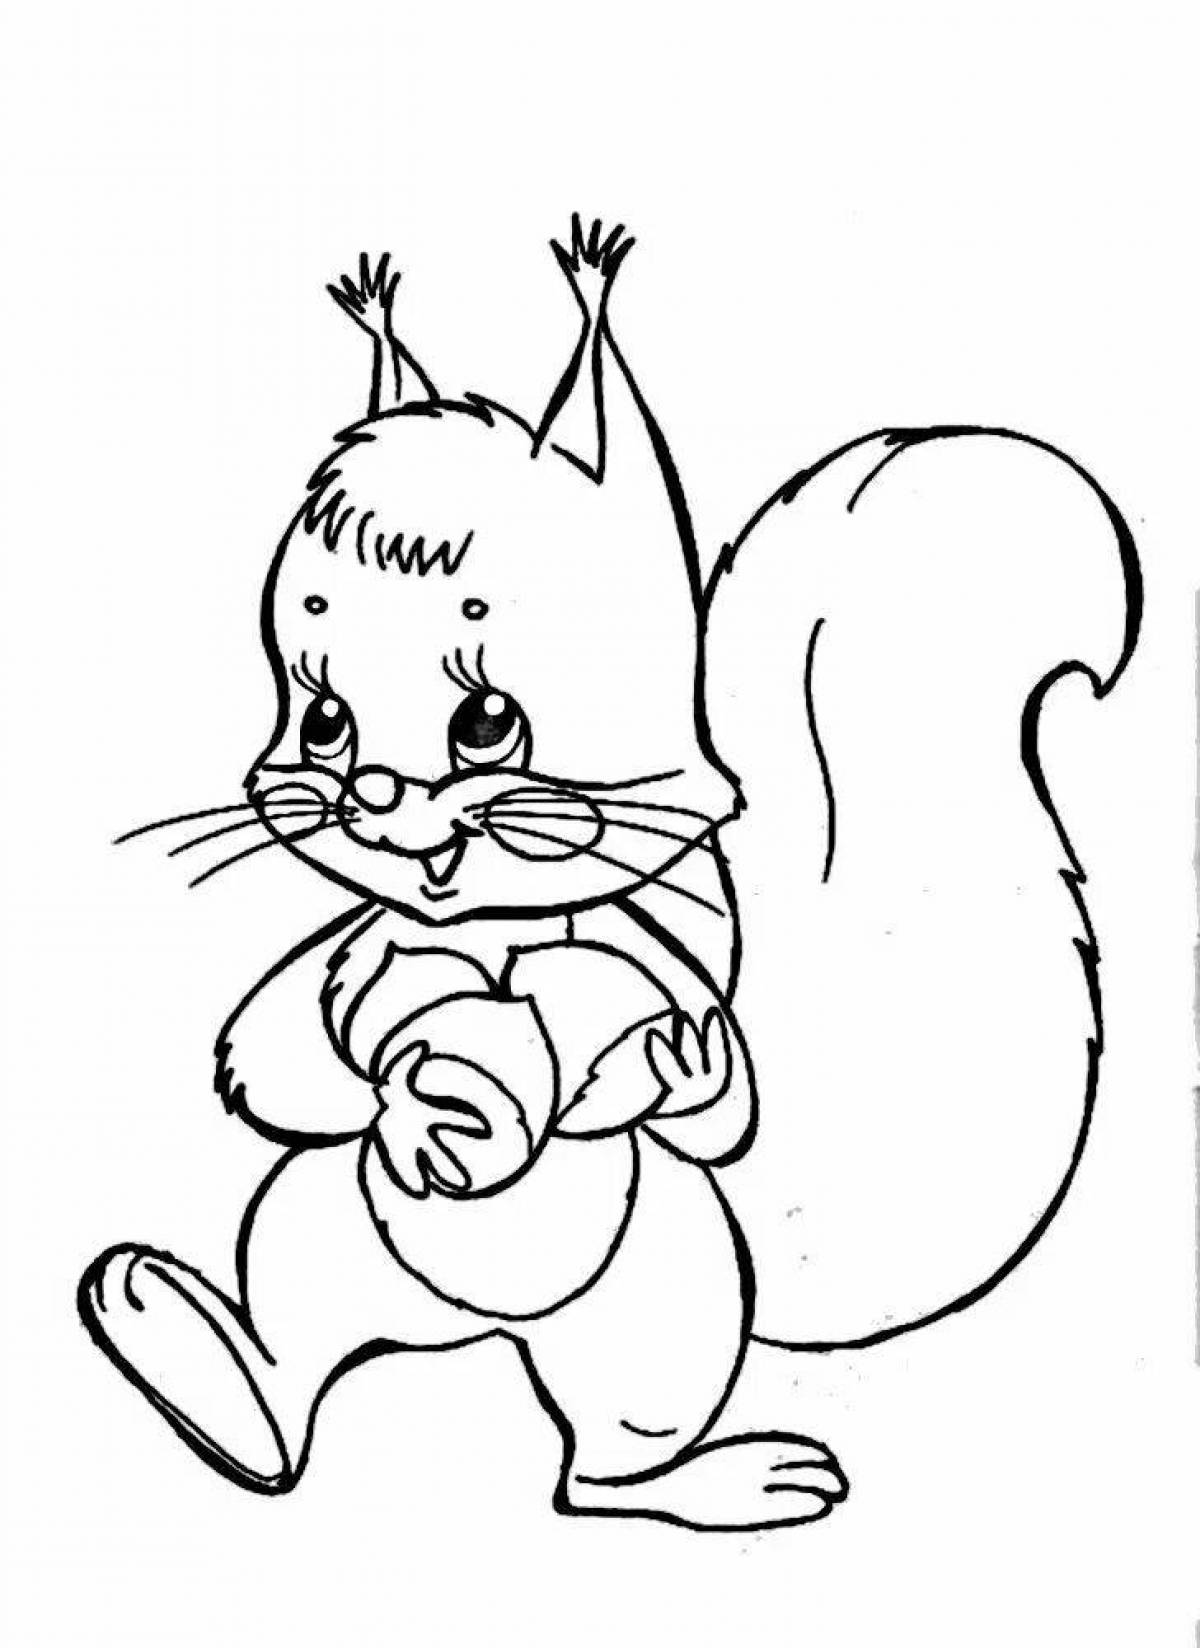 Fun coloring picture of a squirrel